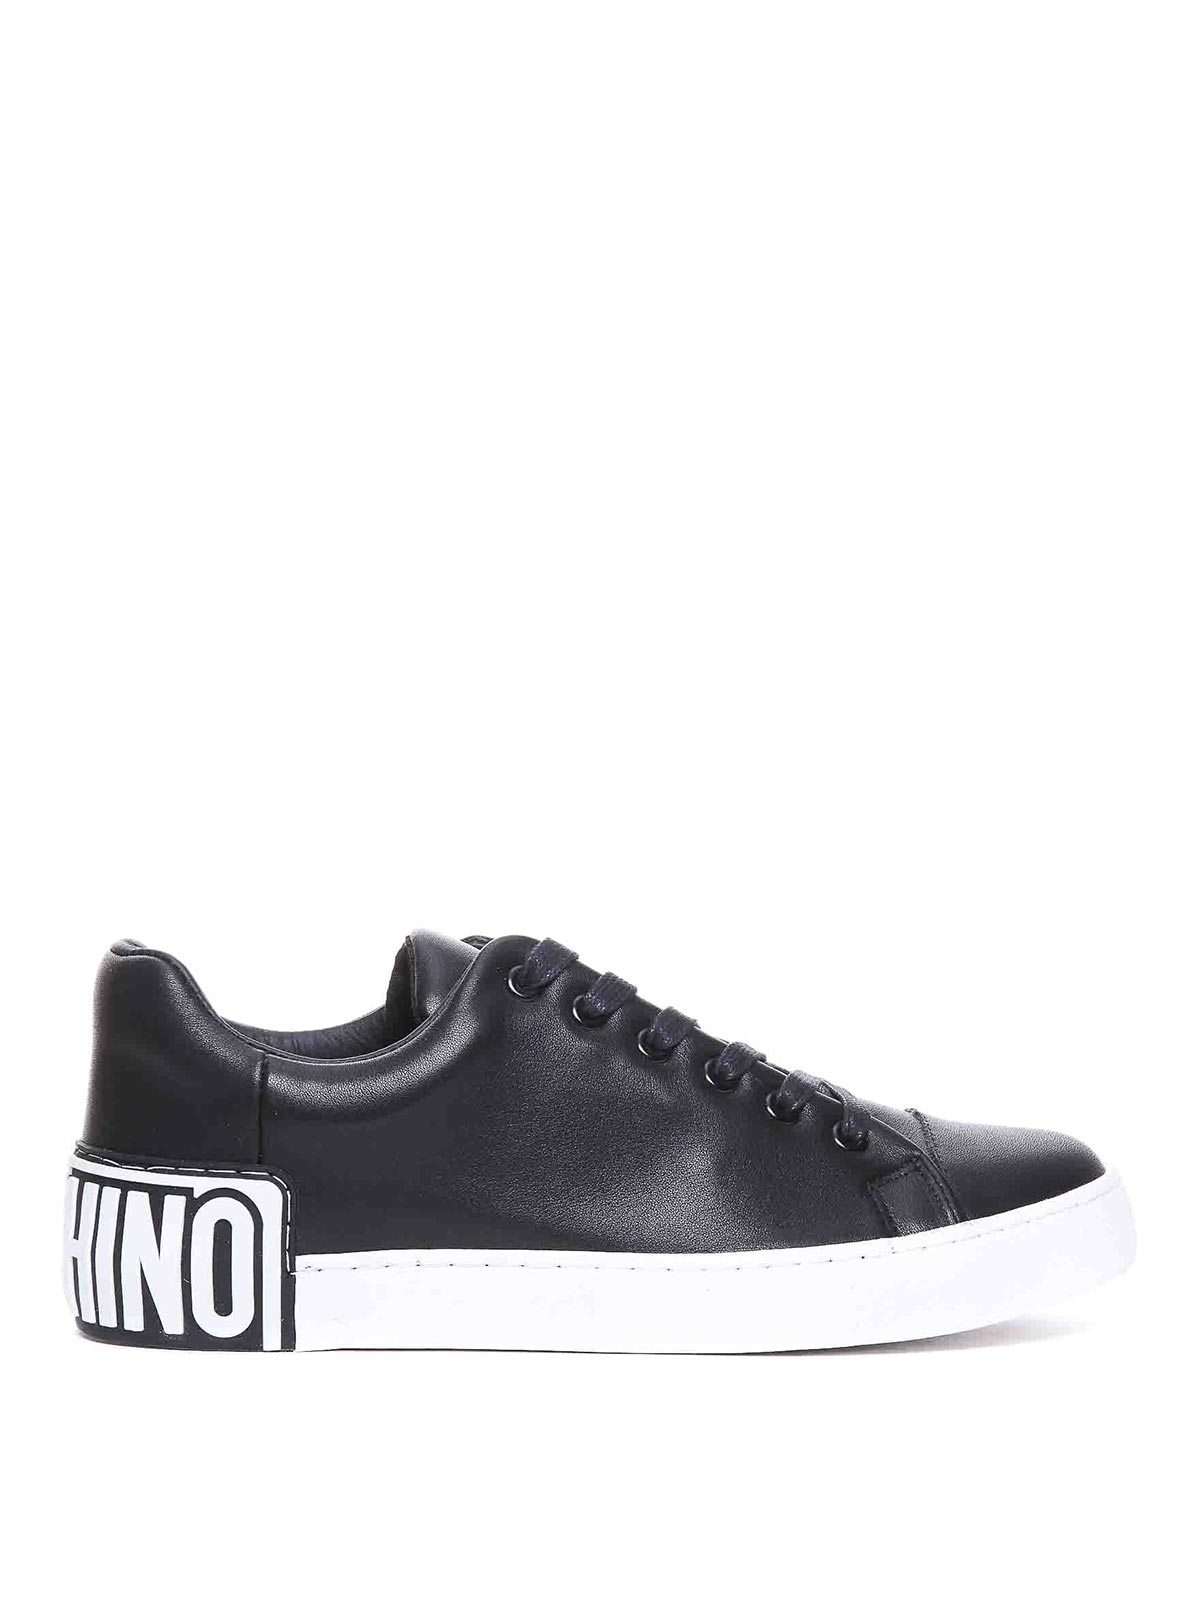 Moschino Maxi Logo Trainers In Black